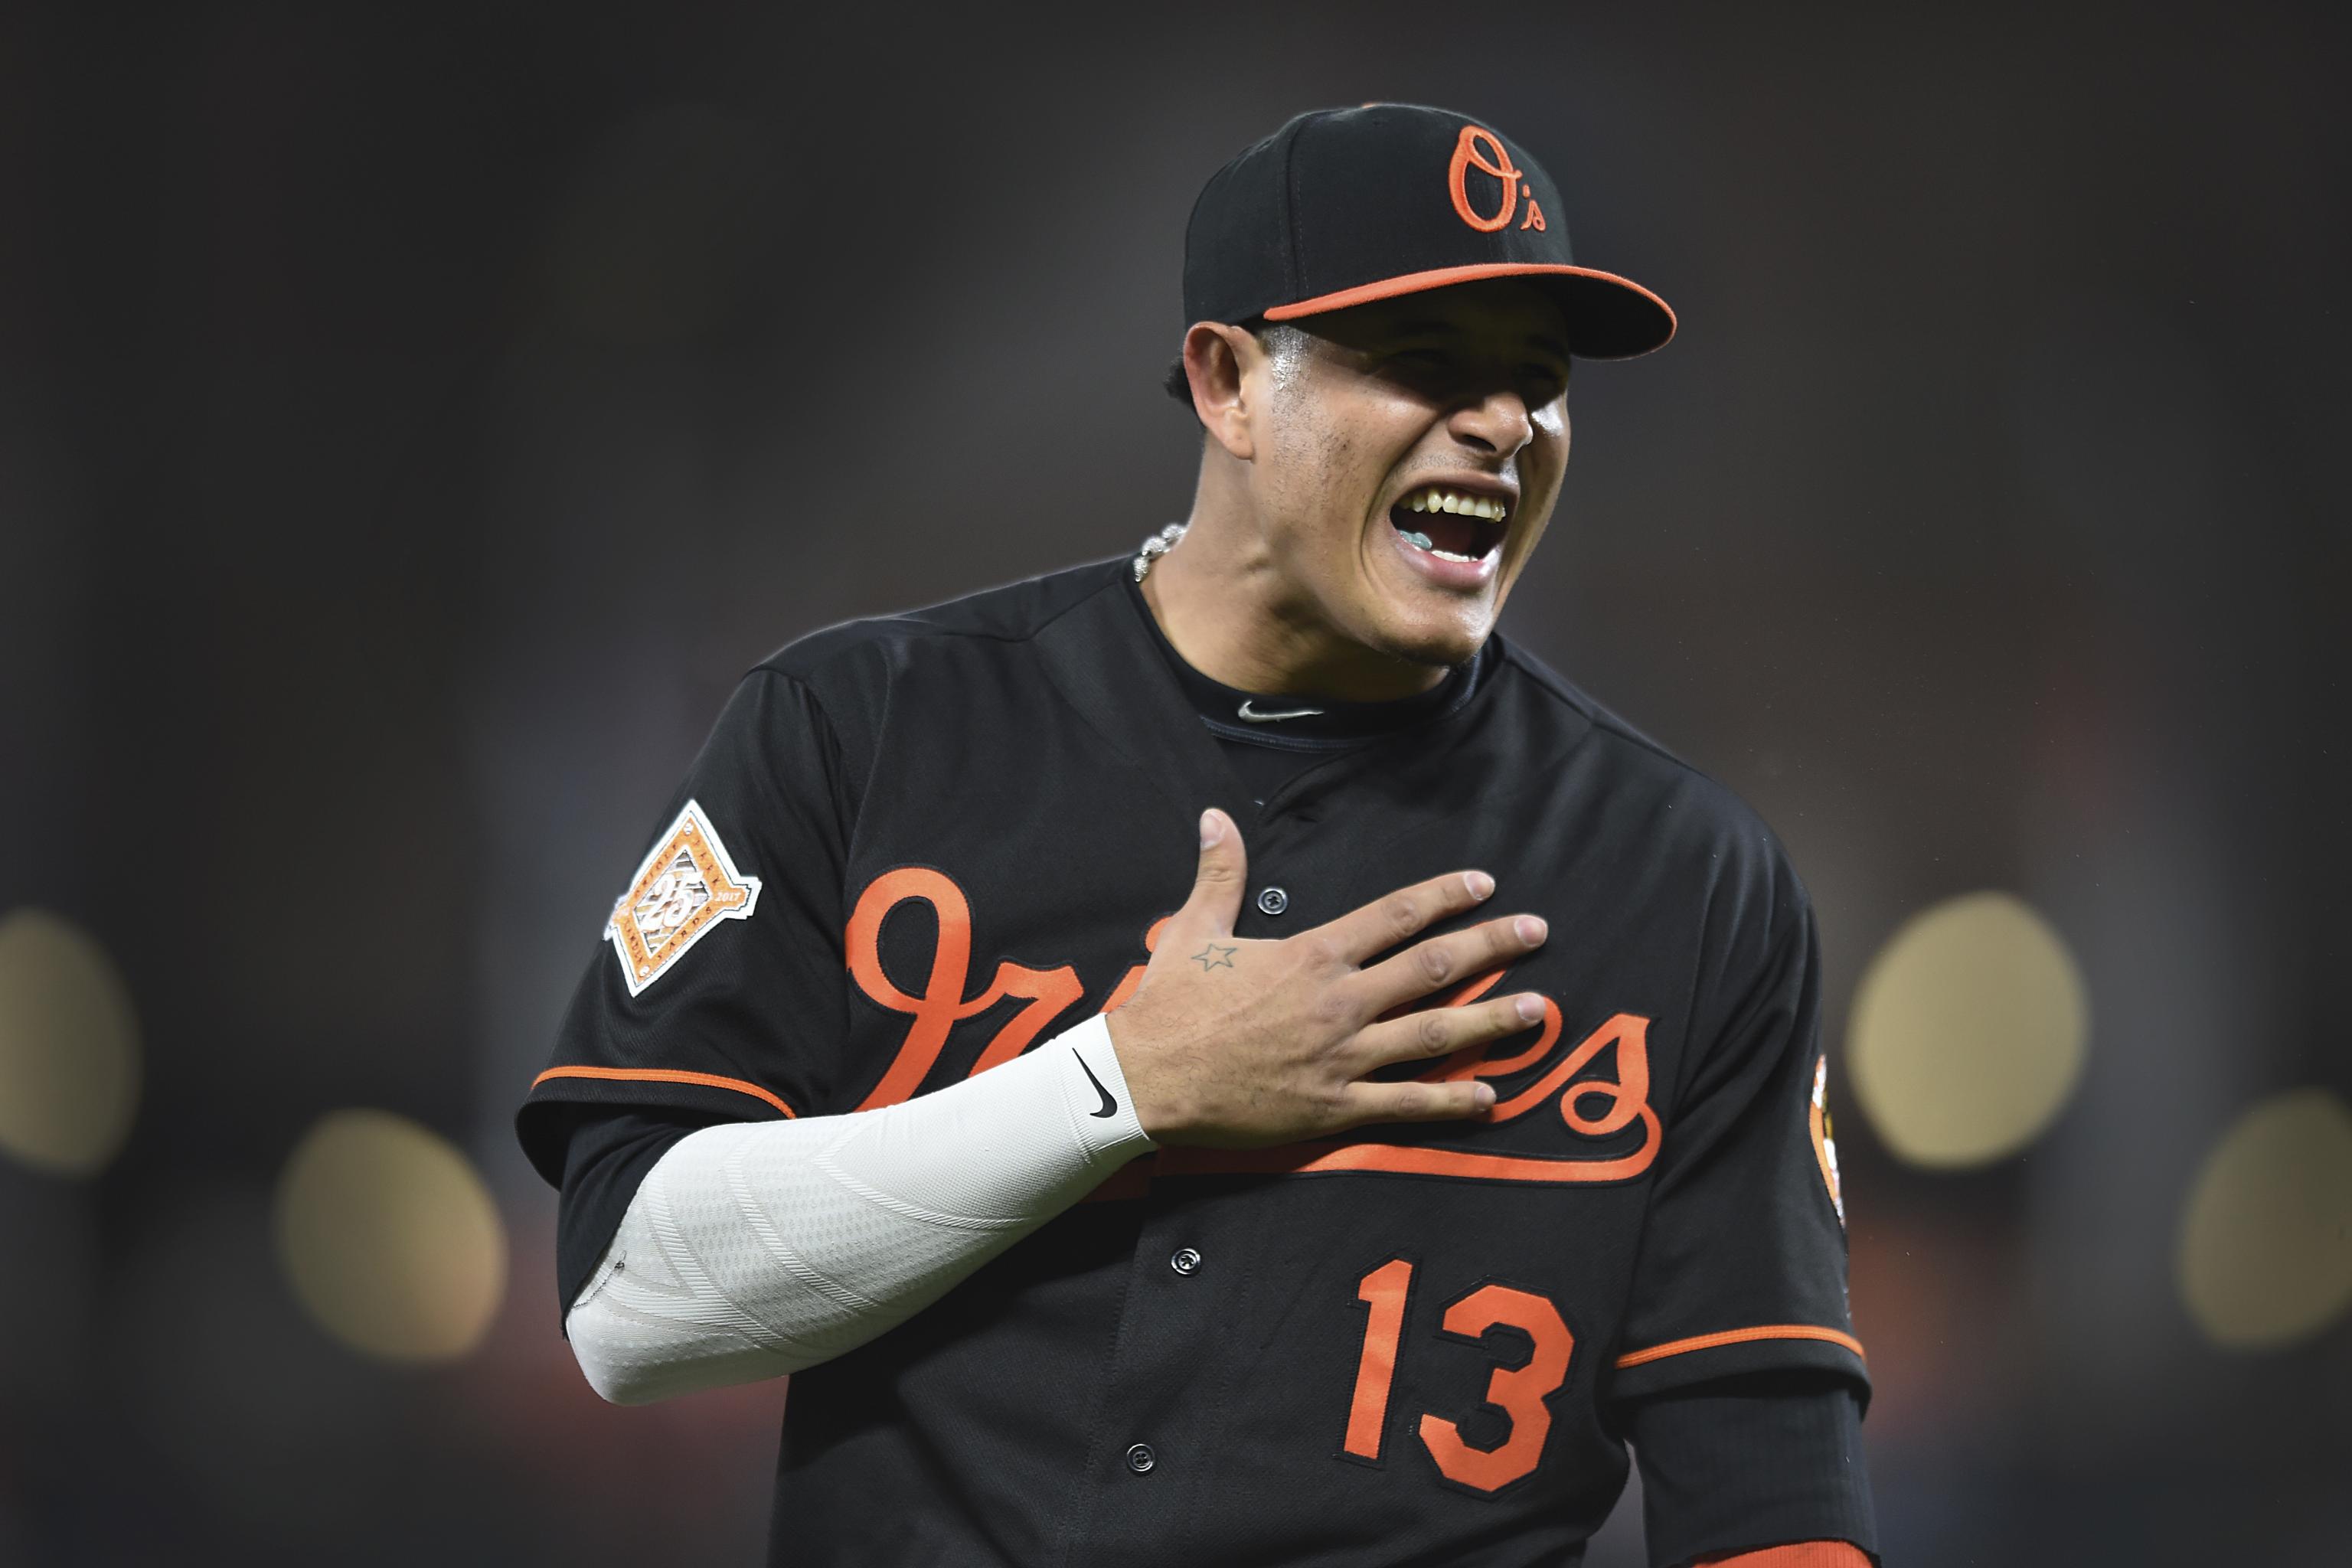 Why is Manny Machado wearing an orioles shirt under his Jersey? : r/mlb